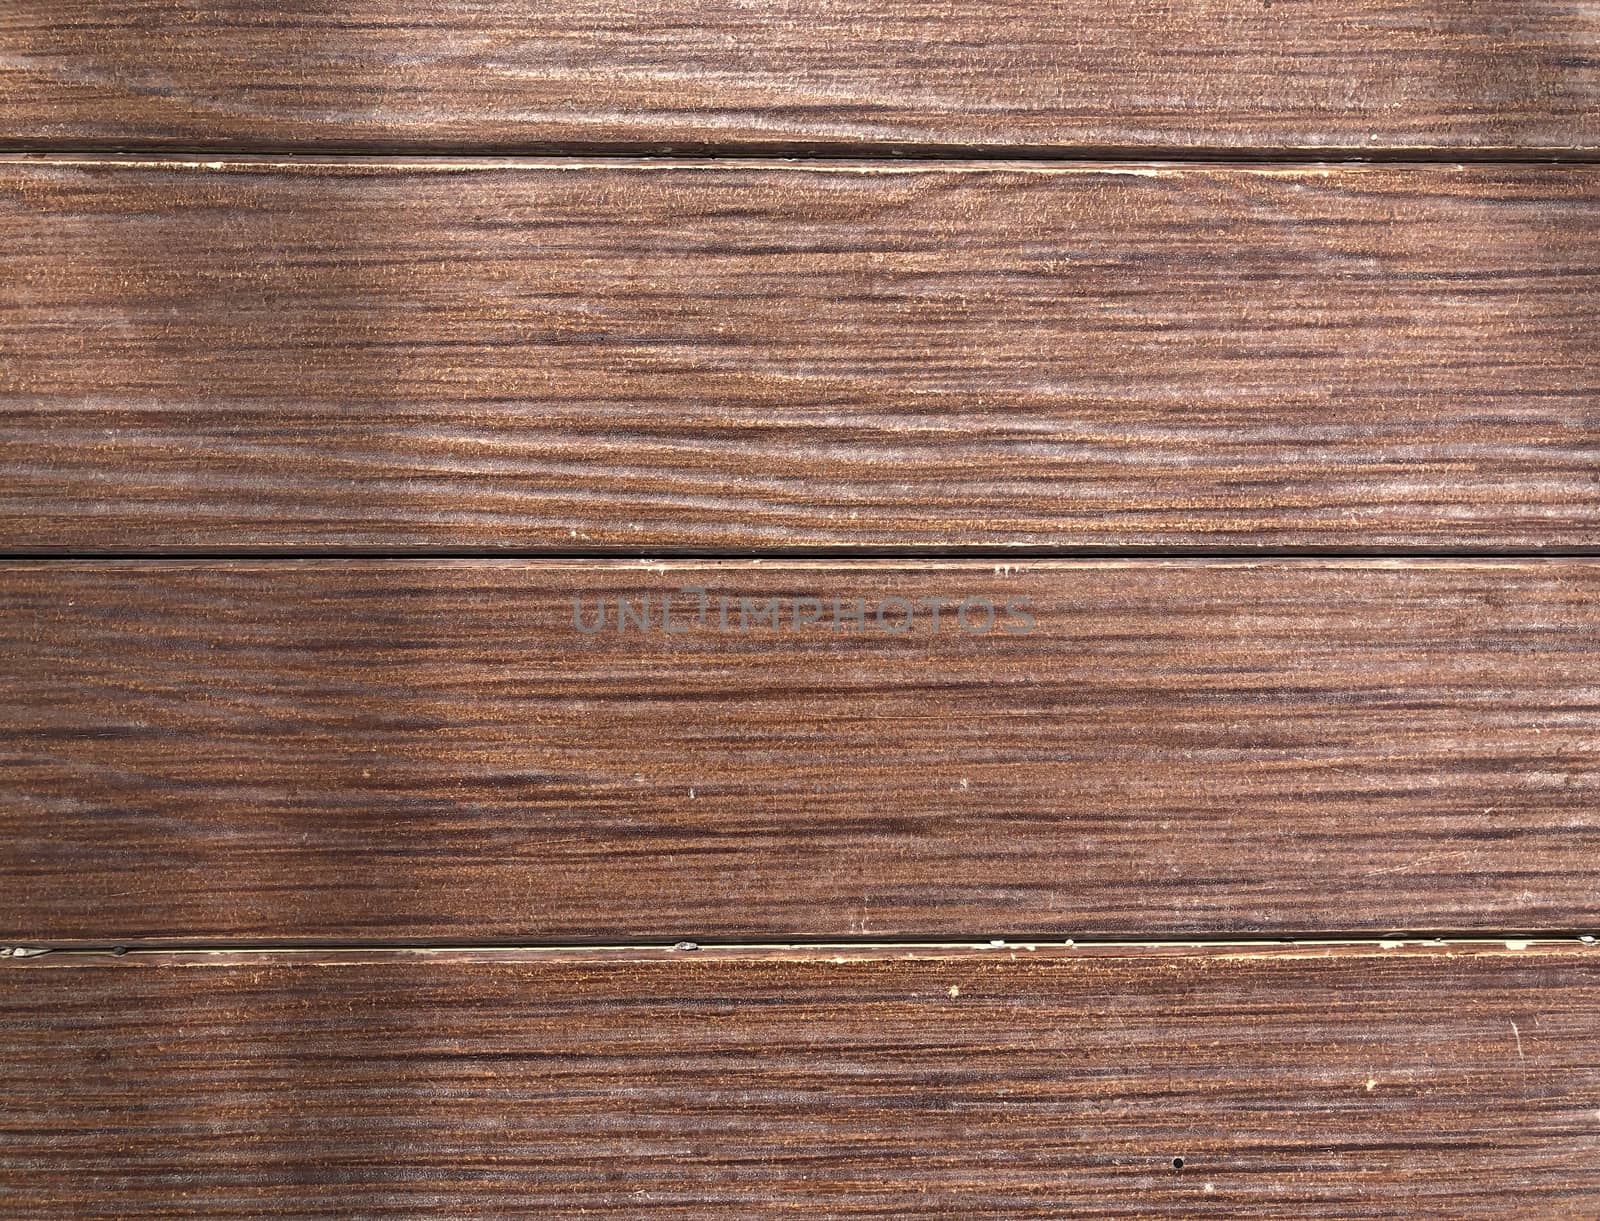 Abstract brown wood texture background.